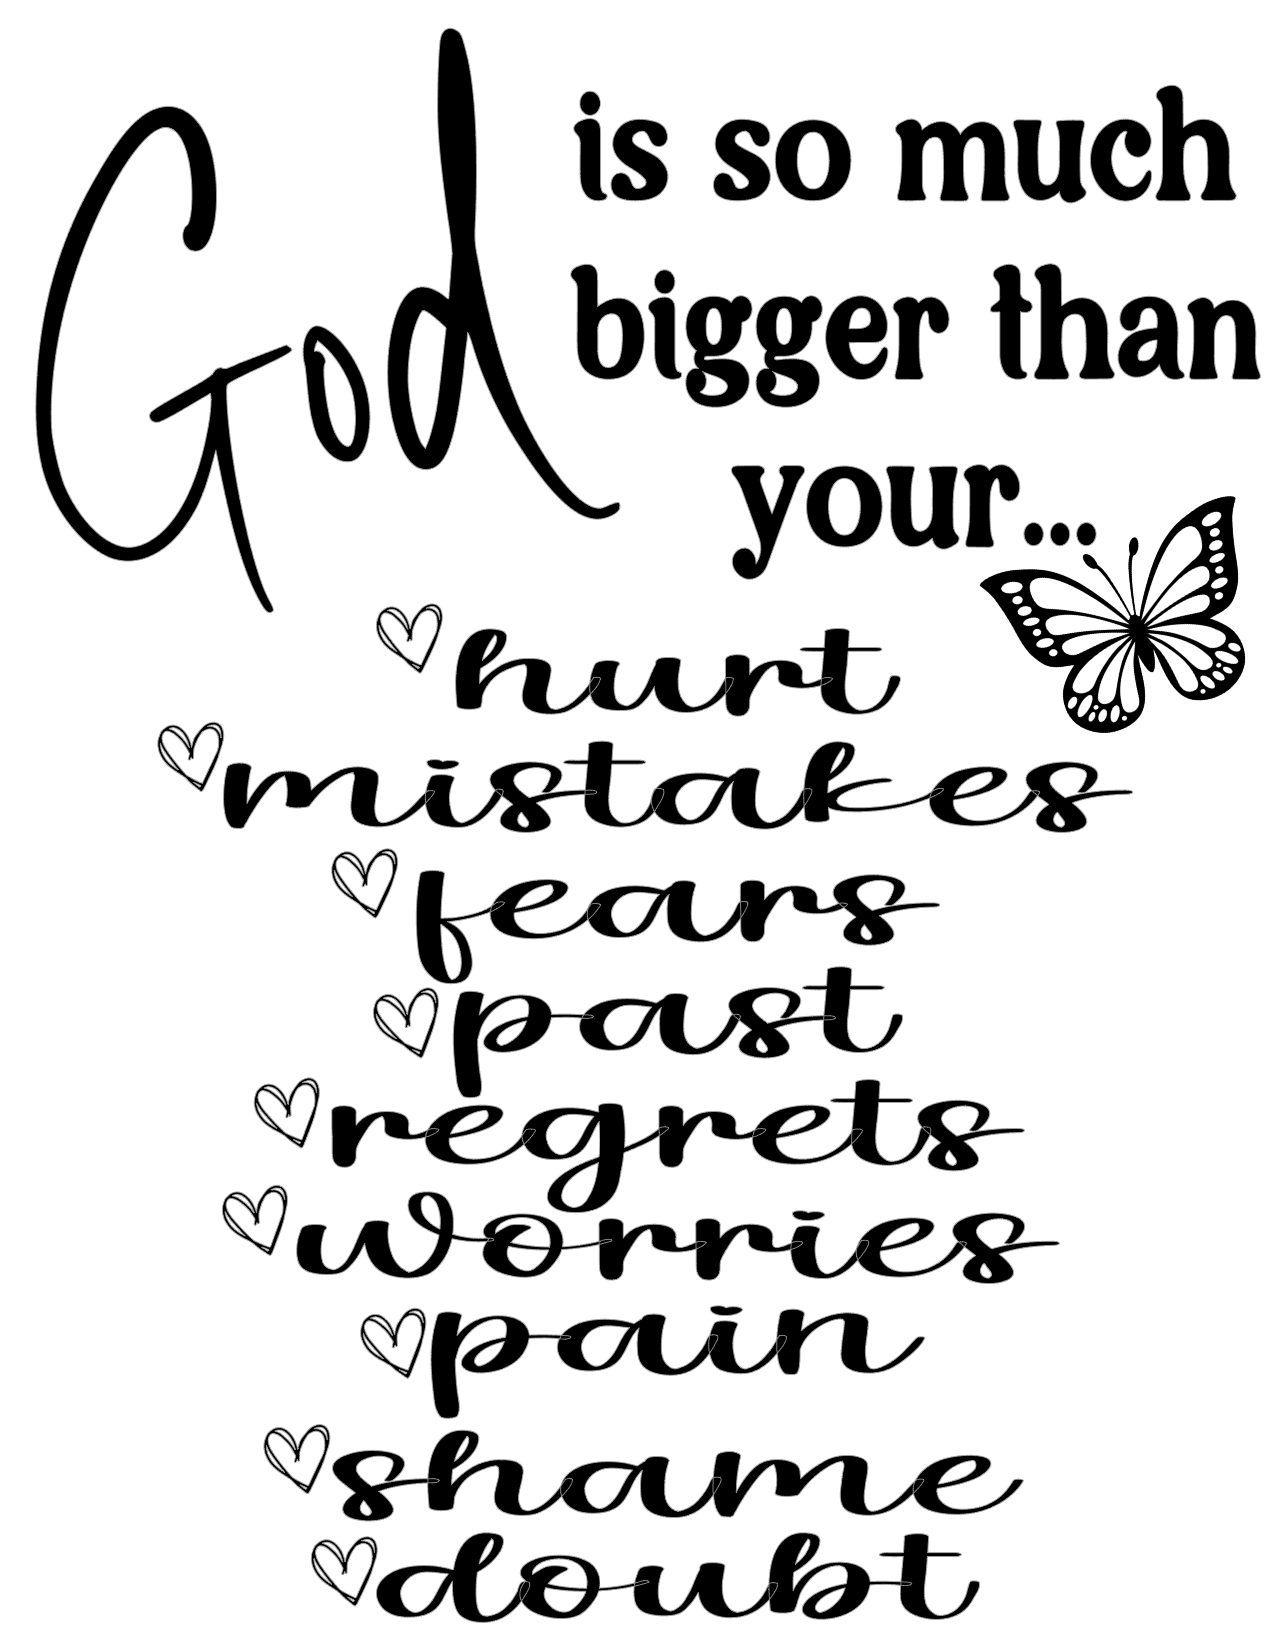 #343 God is so much bigger than your...